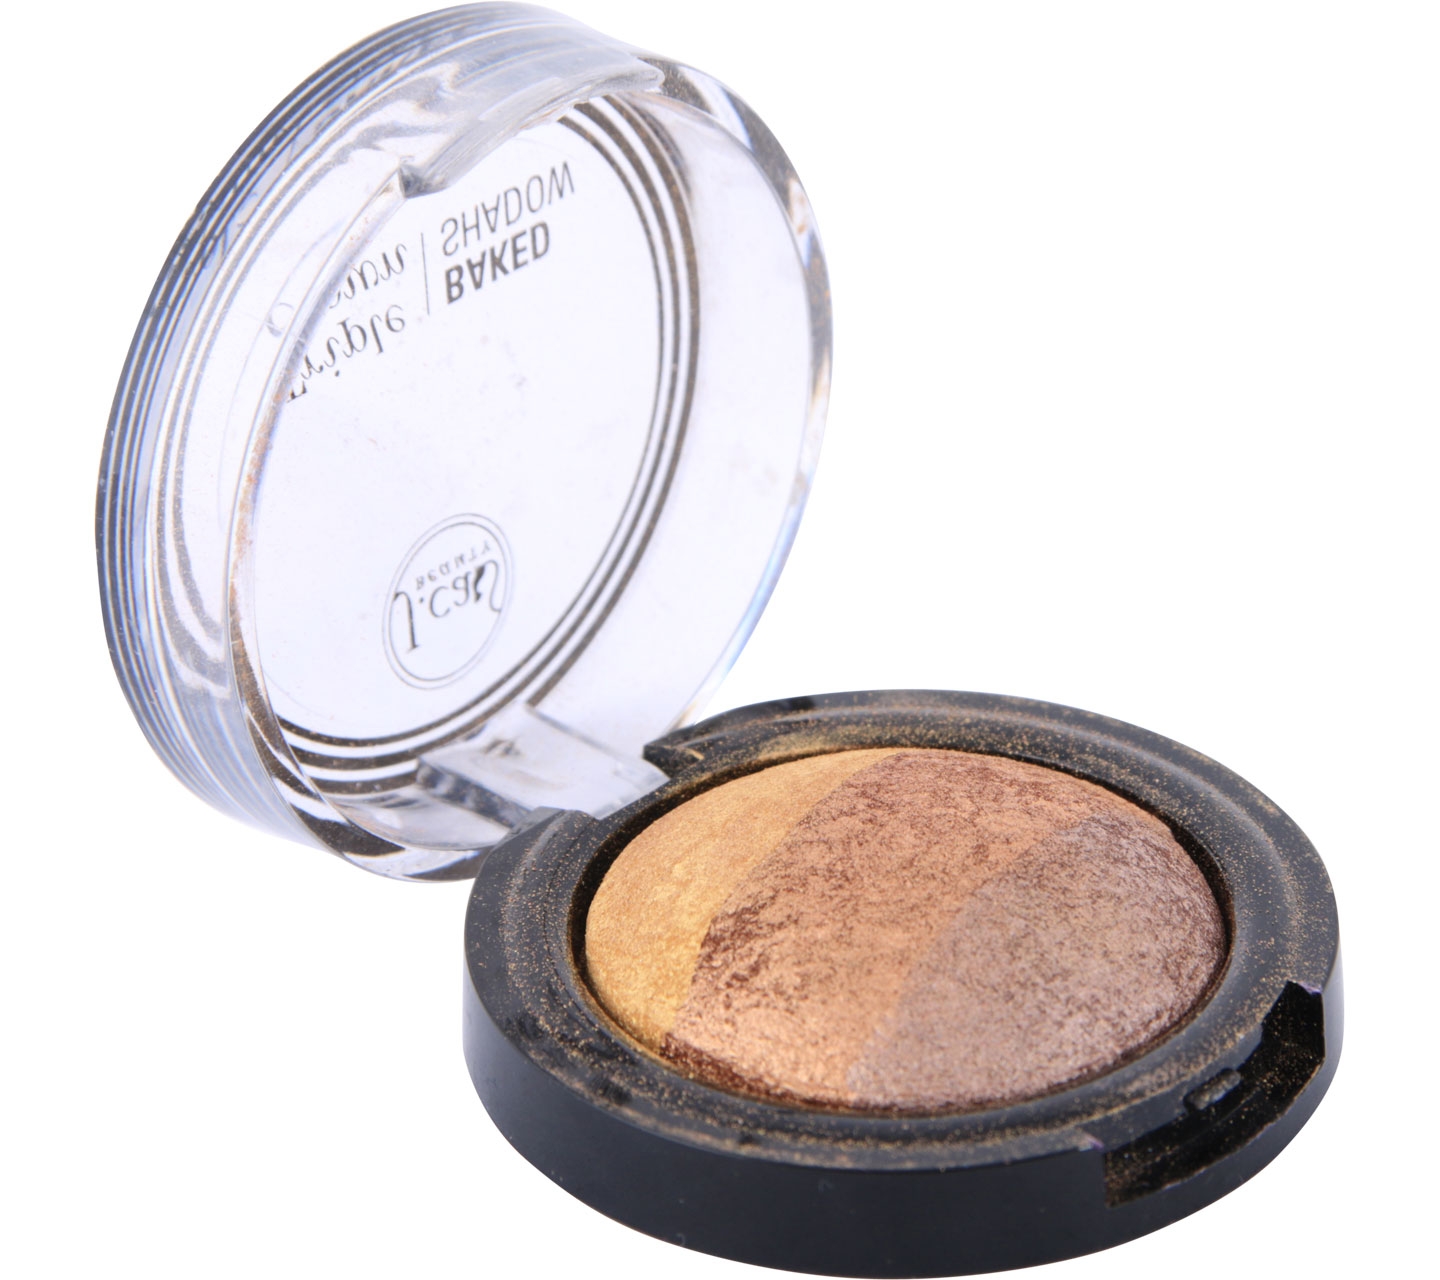 J.cat beauty Grilled Mango Triple Crown Baked Shadow Faces